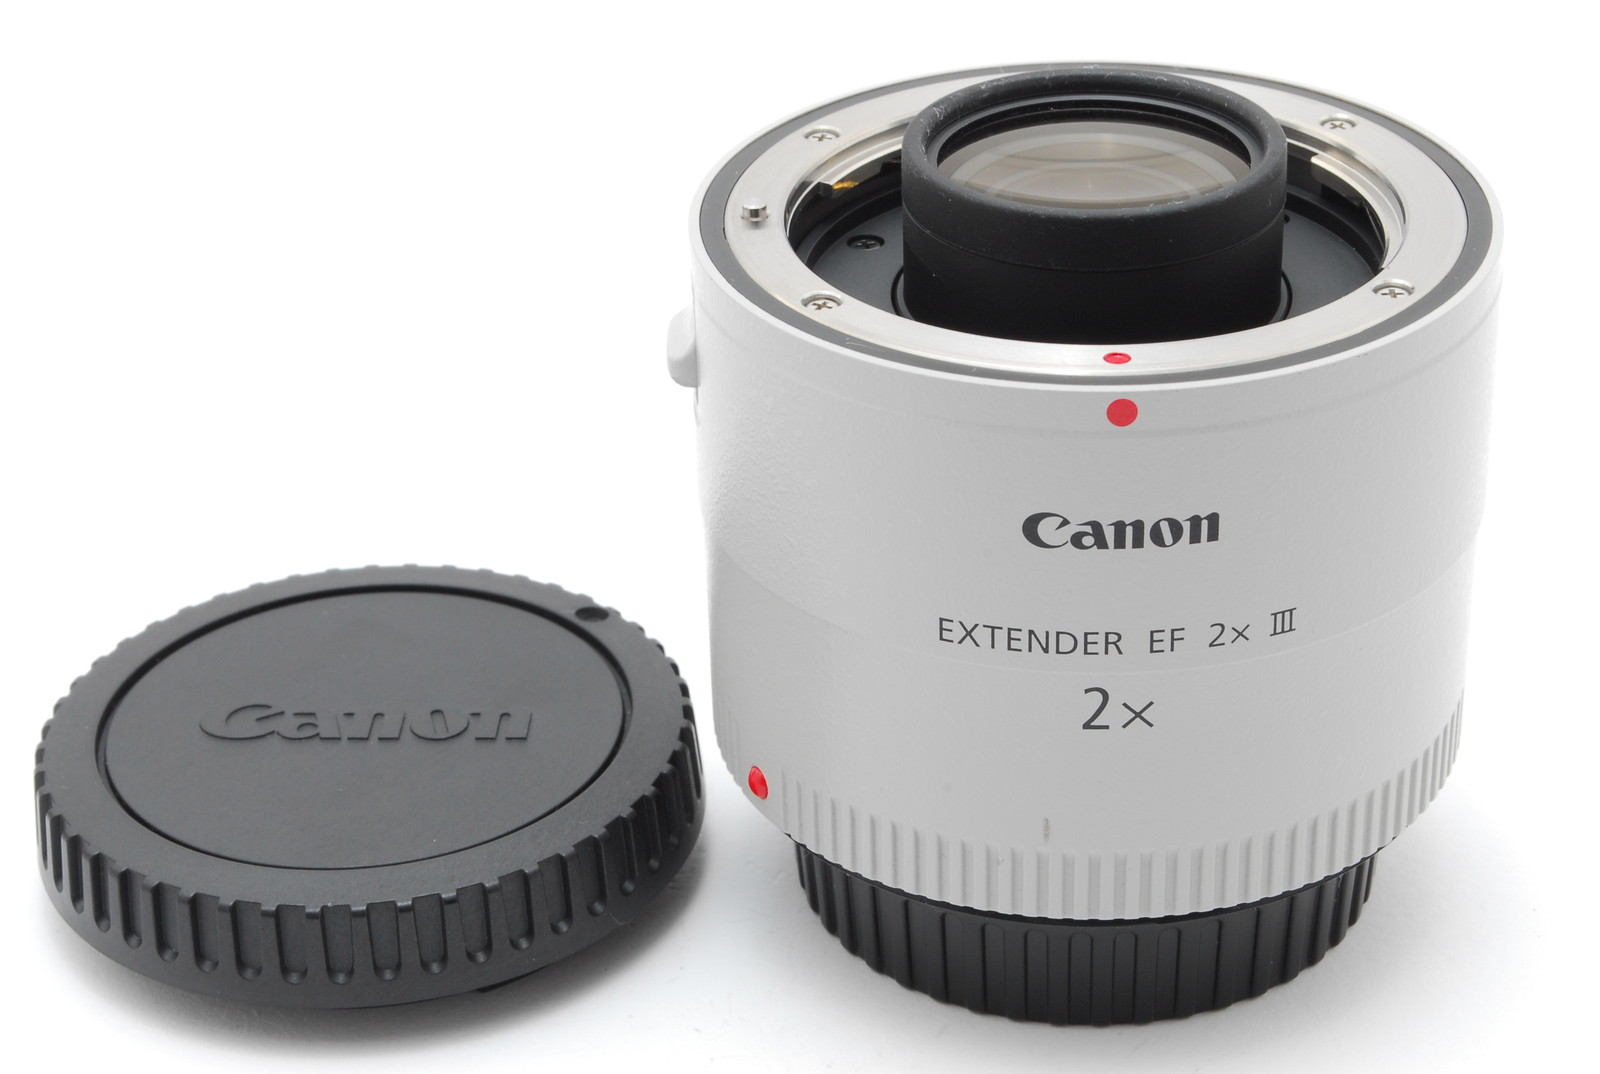 PROMOTION.TOP MINT Canon Extender EF 2x III, Front Cap, Rear Cap from Japan